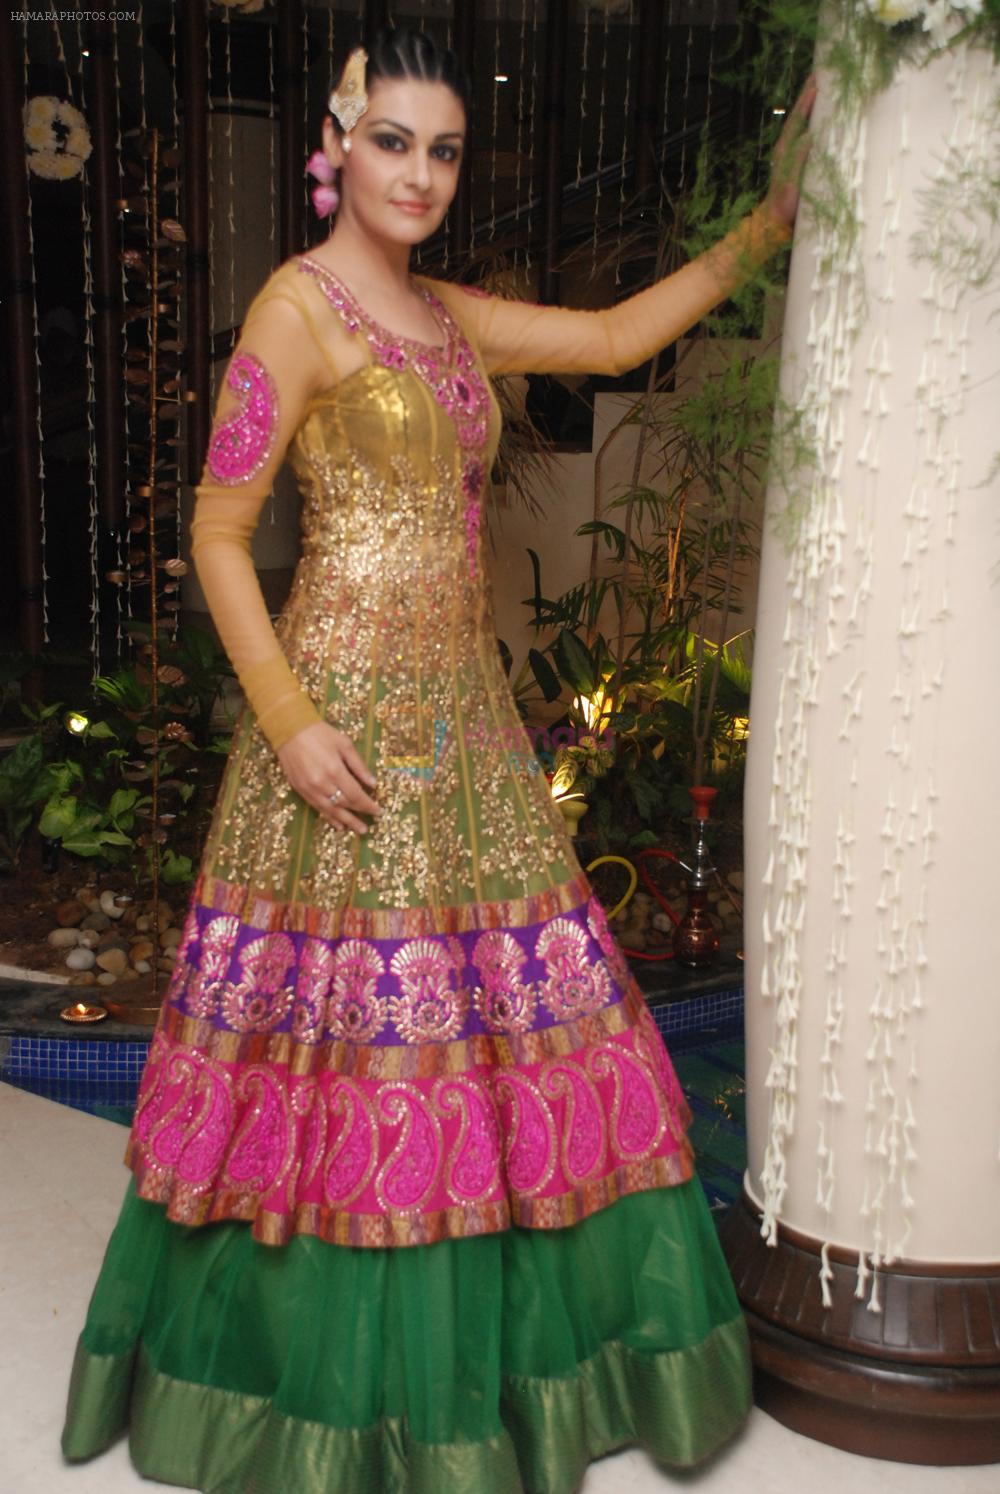 Model Sahiba Singh in Amit's Creation at SHAM-E-AWADH Celebrate this festive season in Awadhi Style in Vedic Spa Mantra on 26th Oct 2012